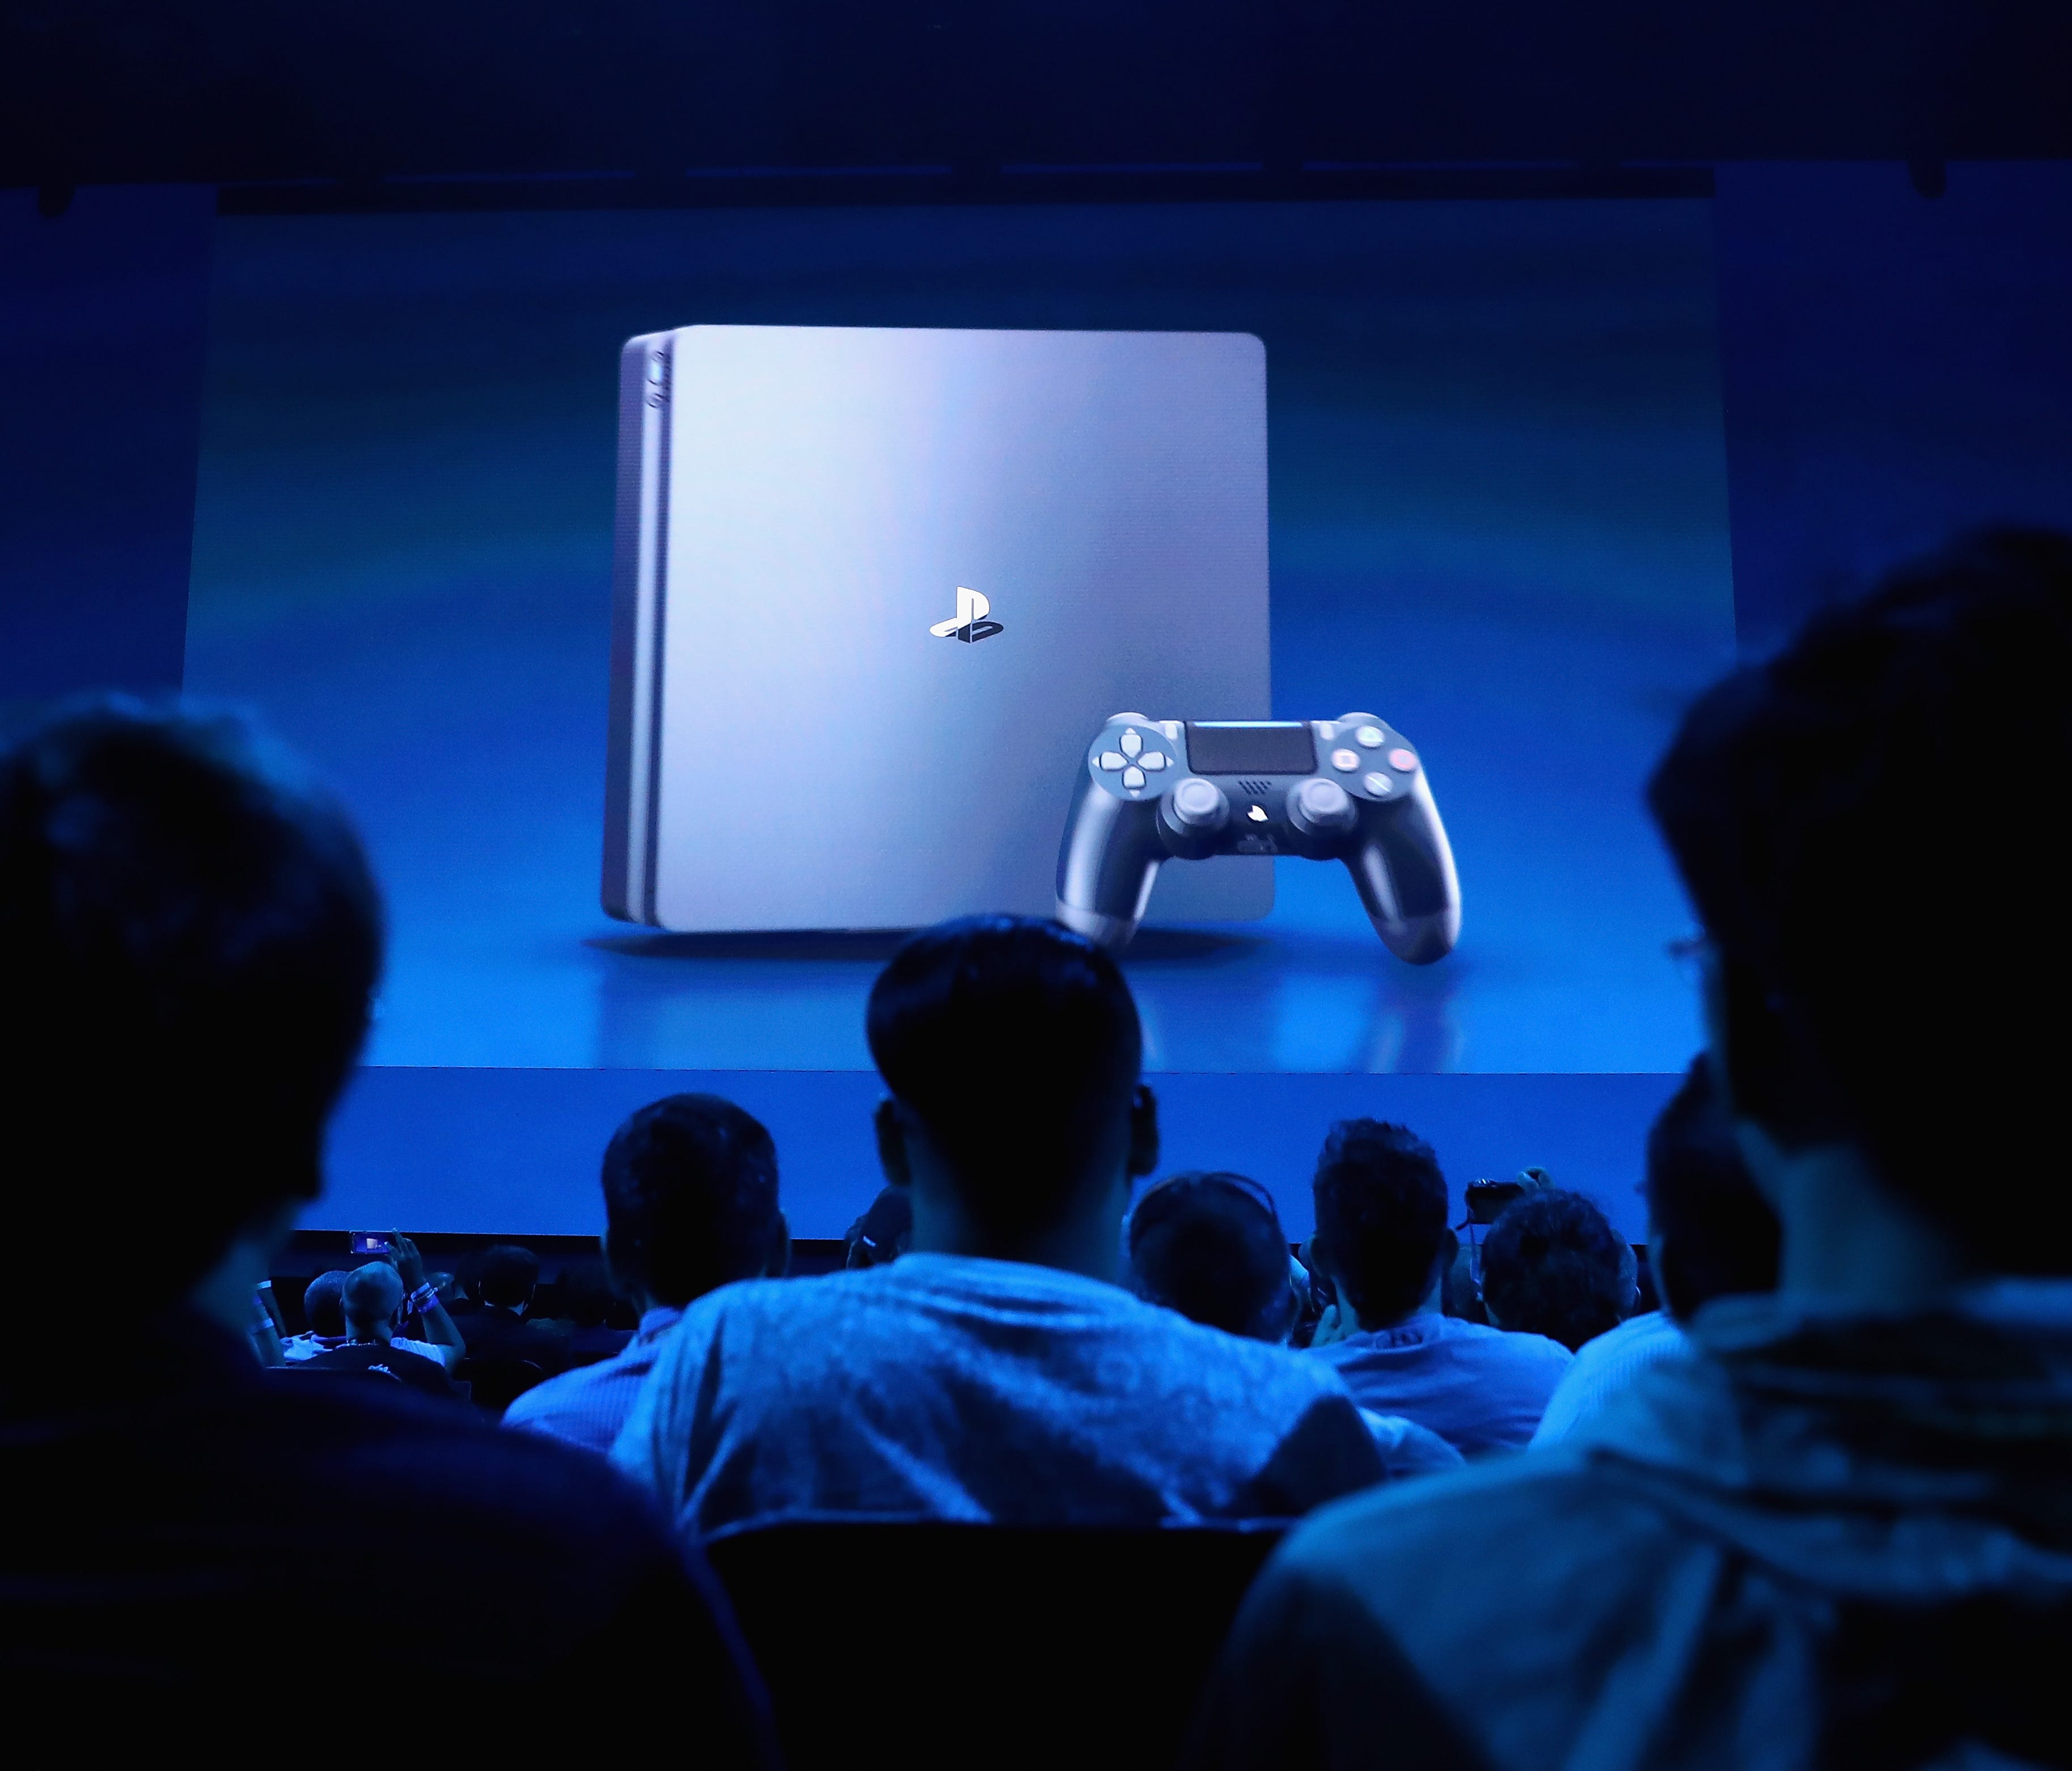 Game enthusiasts and industry personnel attend the Sony Playstation E3 conference at the Shrine Auditorium in Los Angeles.